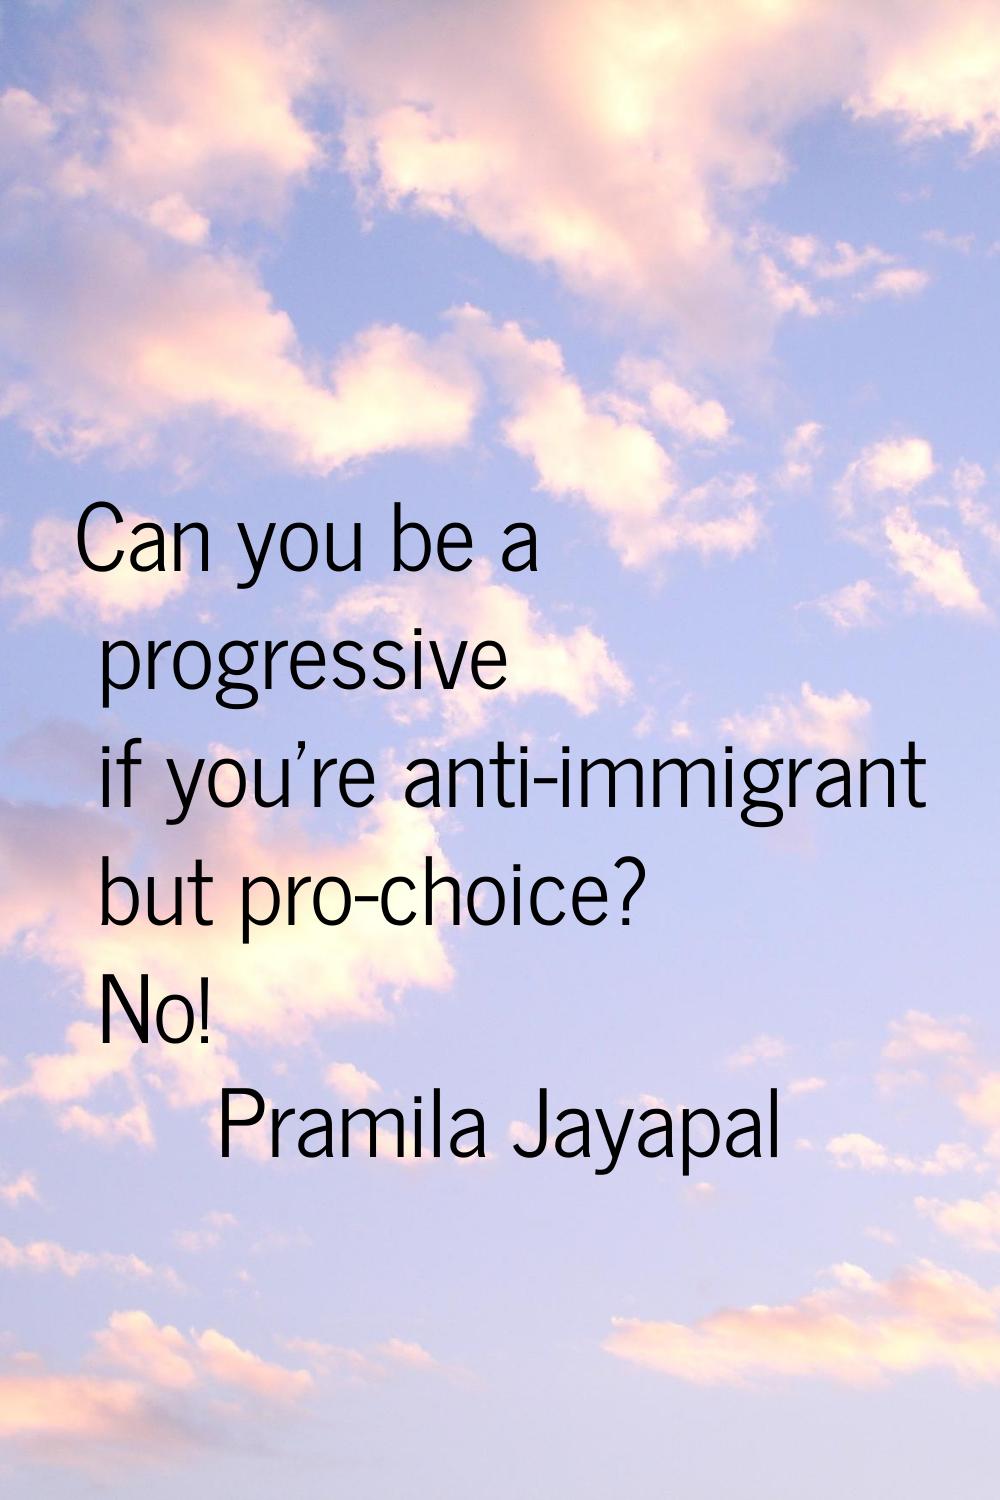 Can you be a progressive if you're anti-immigrant but pro-choice? No!